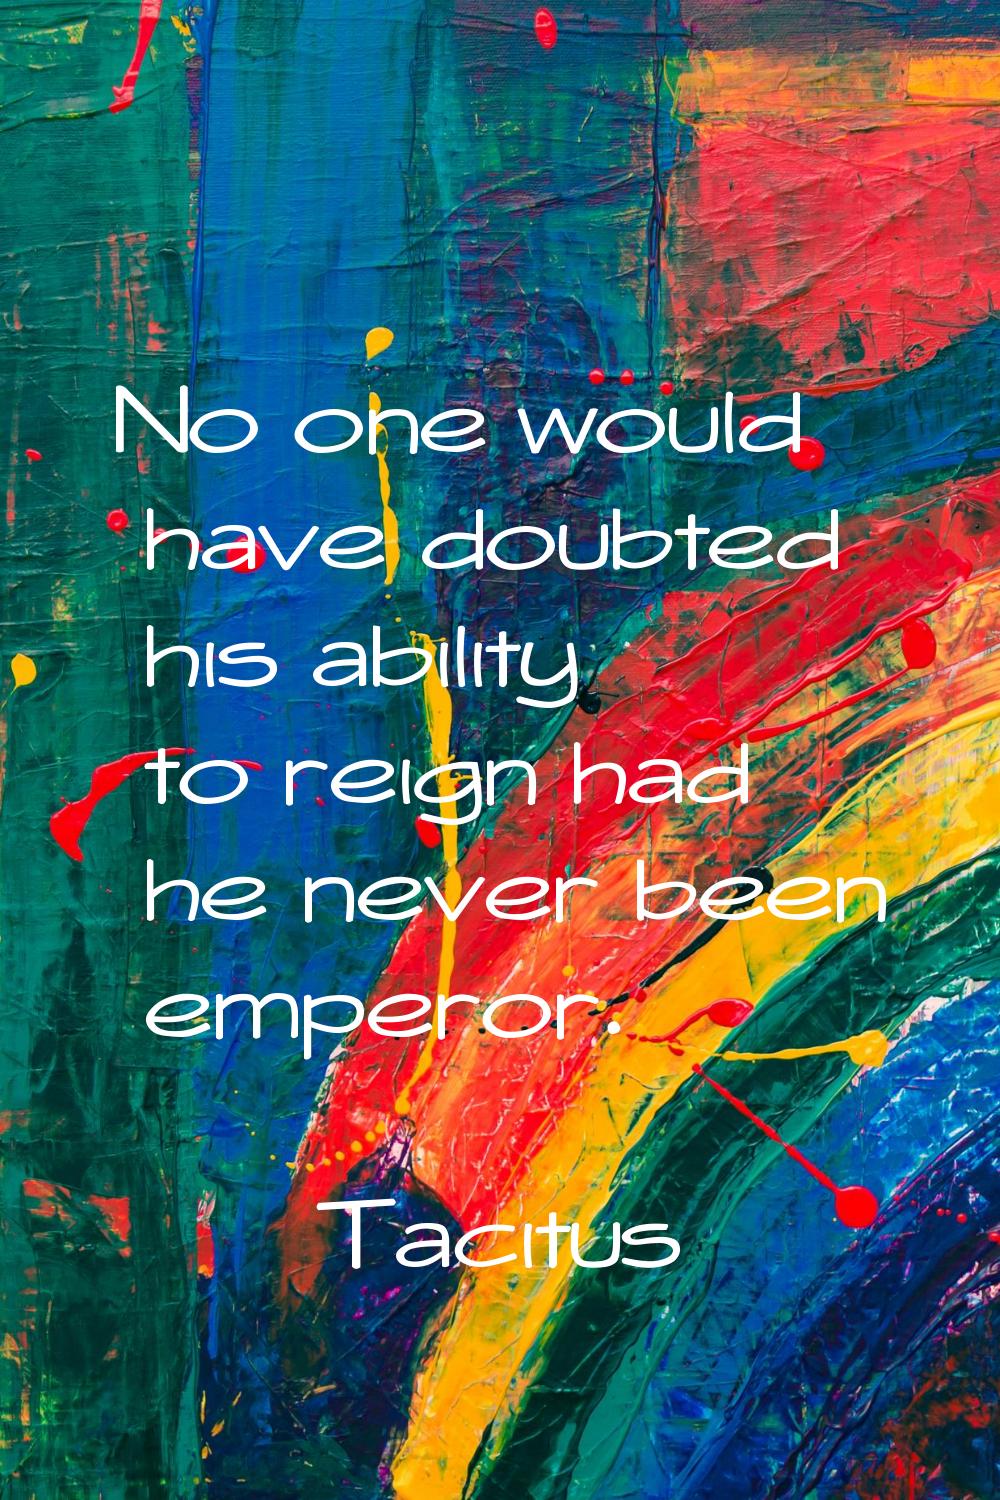 No one would have doubted his ability to reign had he never been emperor.